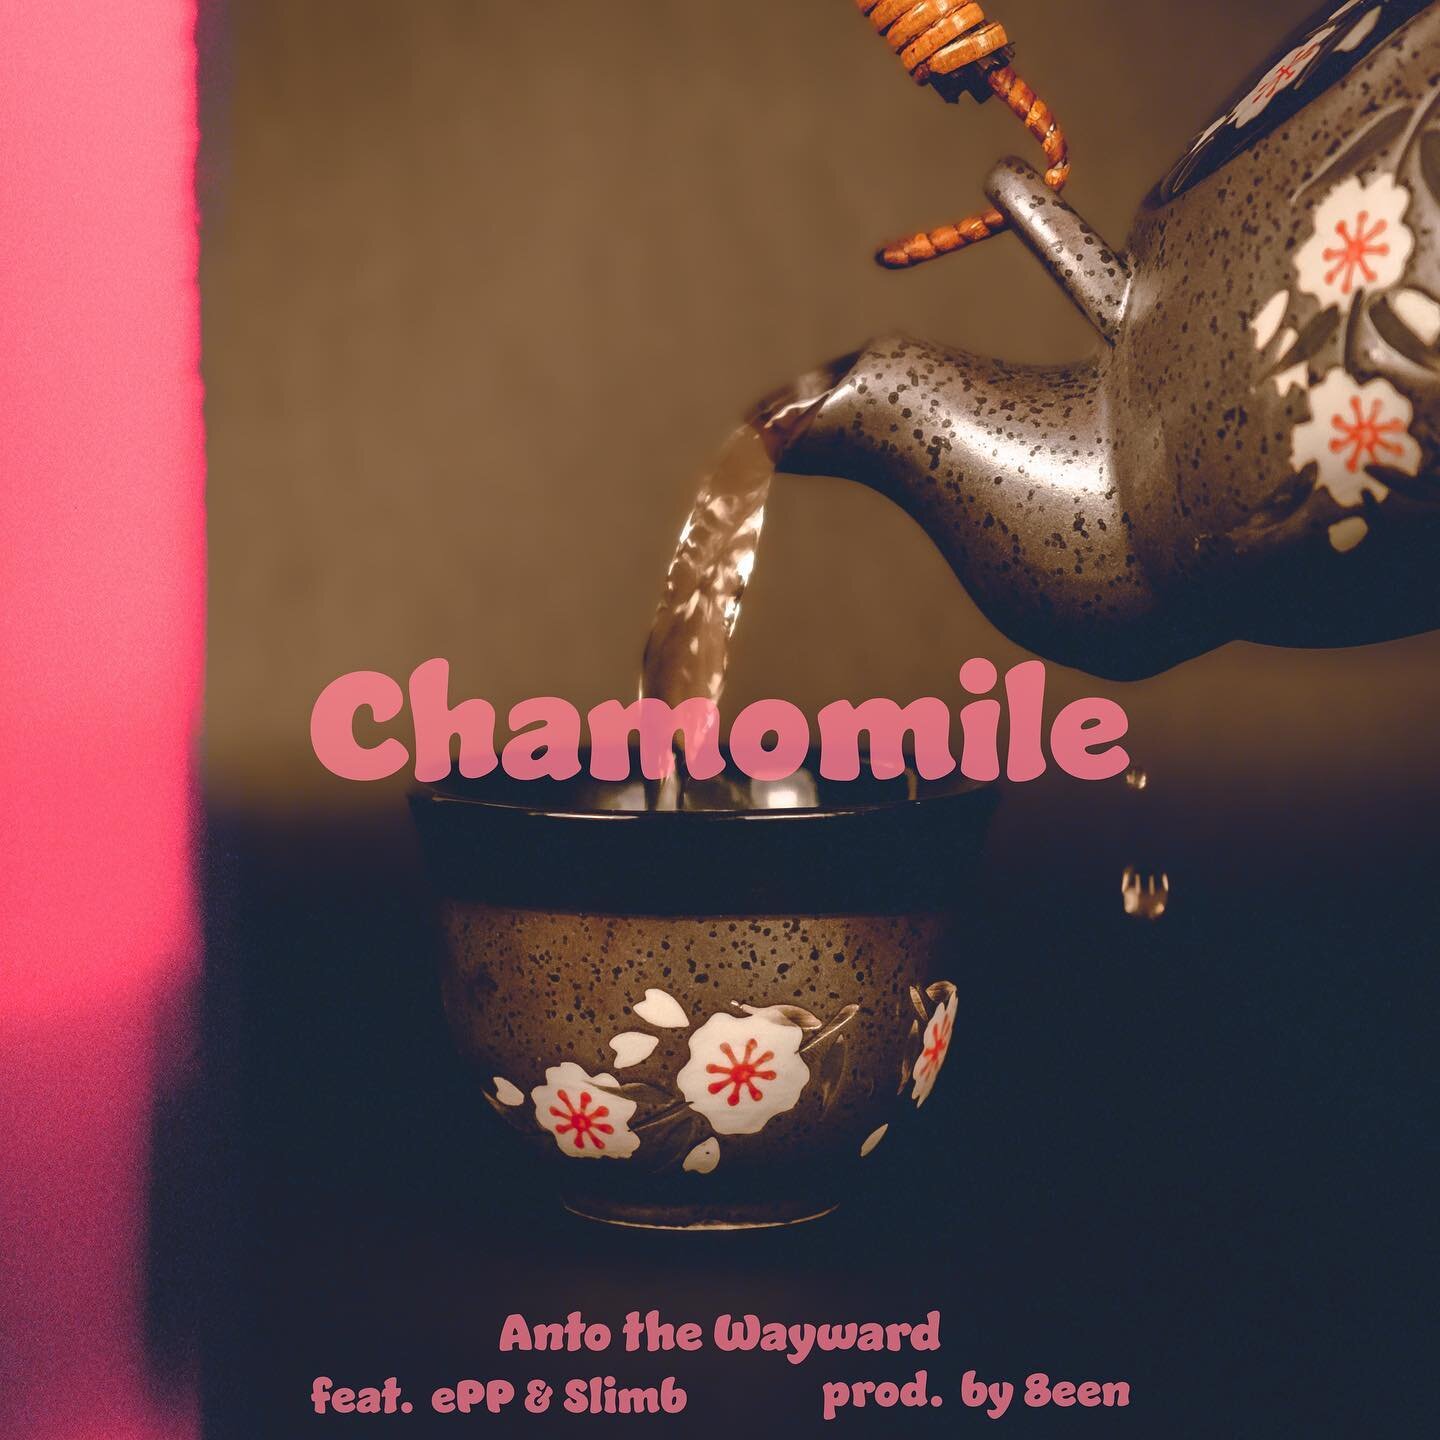 Chamomile Out Now, Cover By JSN. 
@antothewayward ft. @eppffm @slimb prod by. @8eenmusic